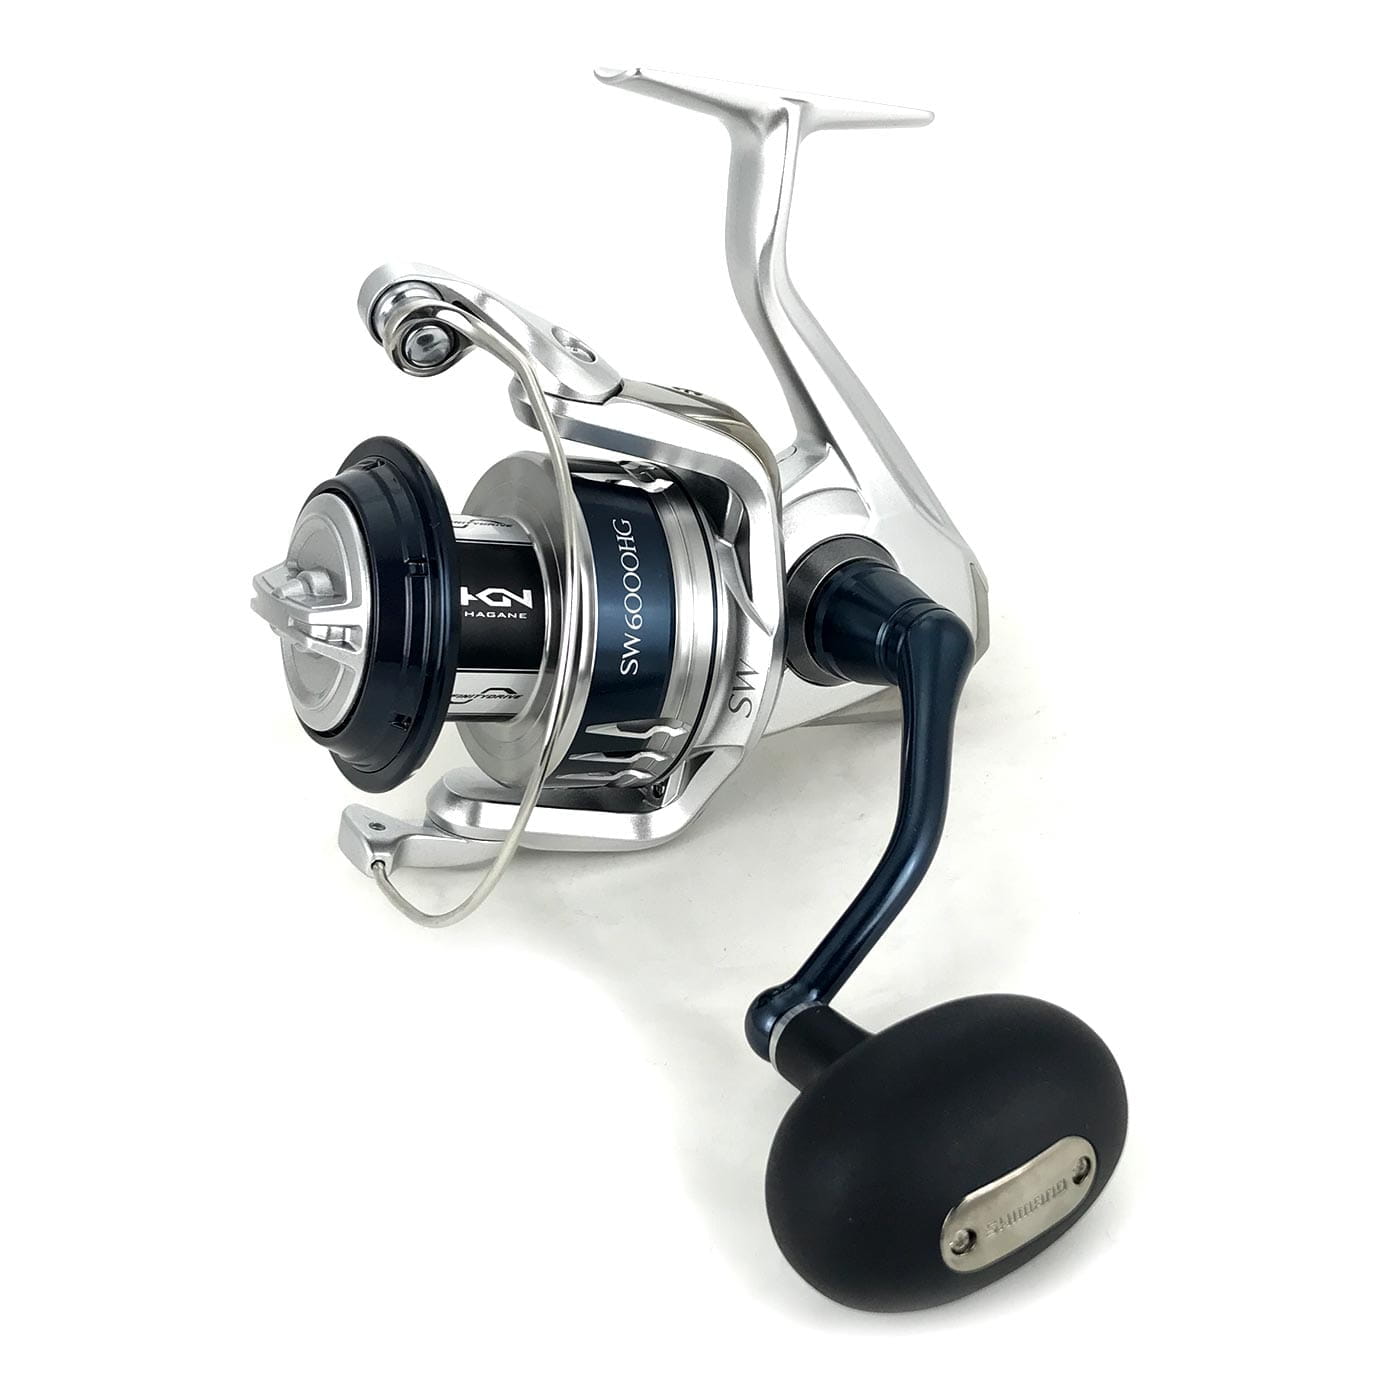 Shimano Saragosa SW A Spinning Reels - Saltwater